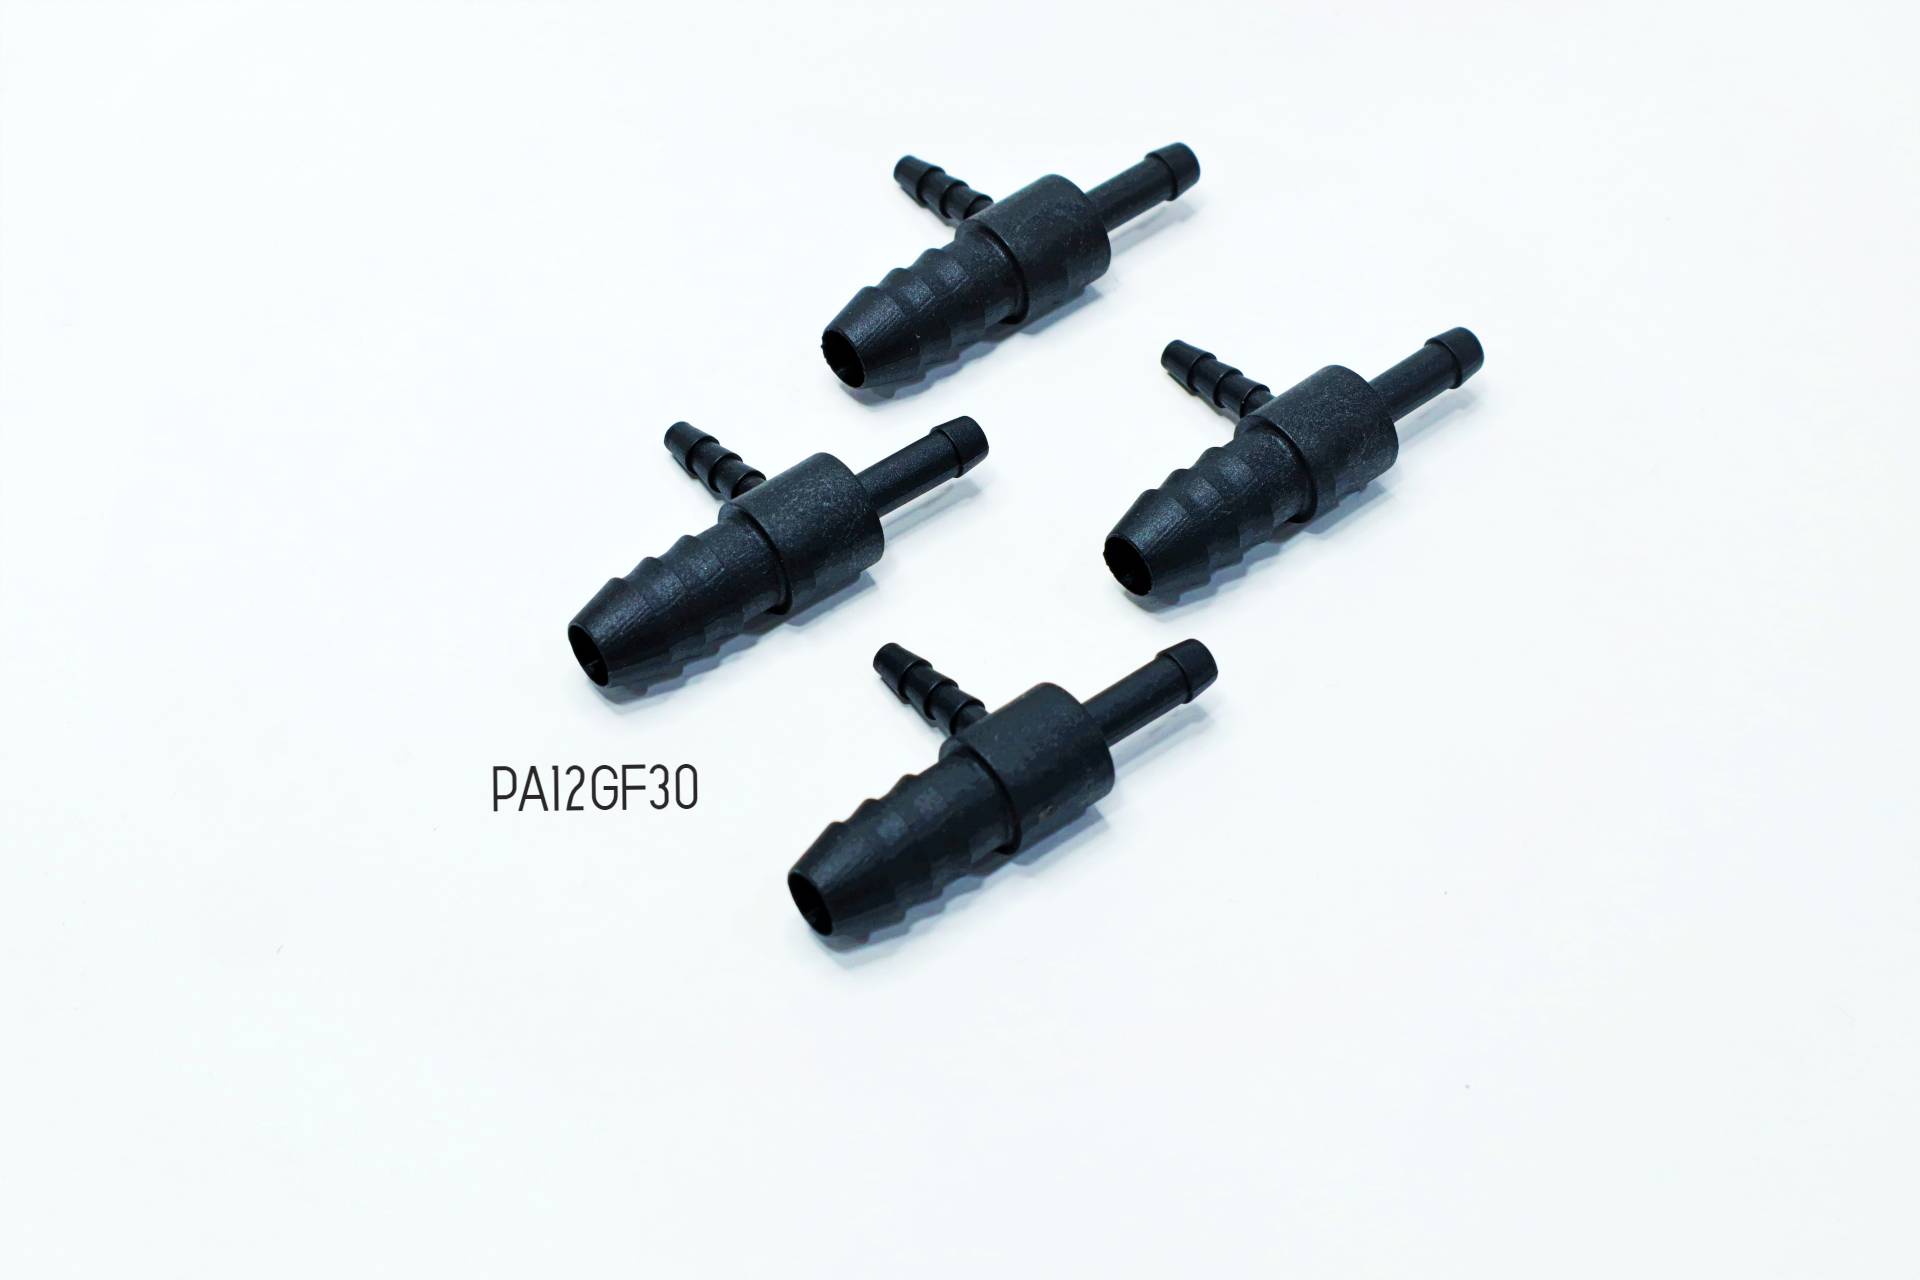 Amuse Injection molding services High performance polymer part for automotive fuel connector